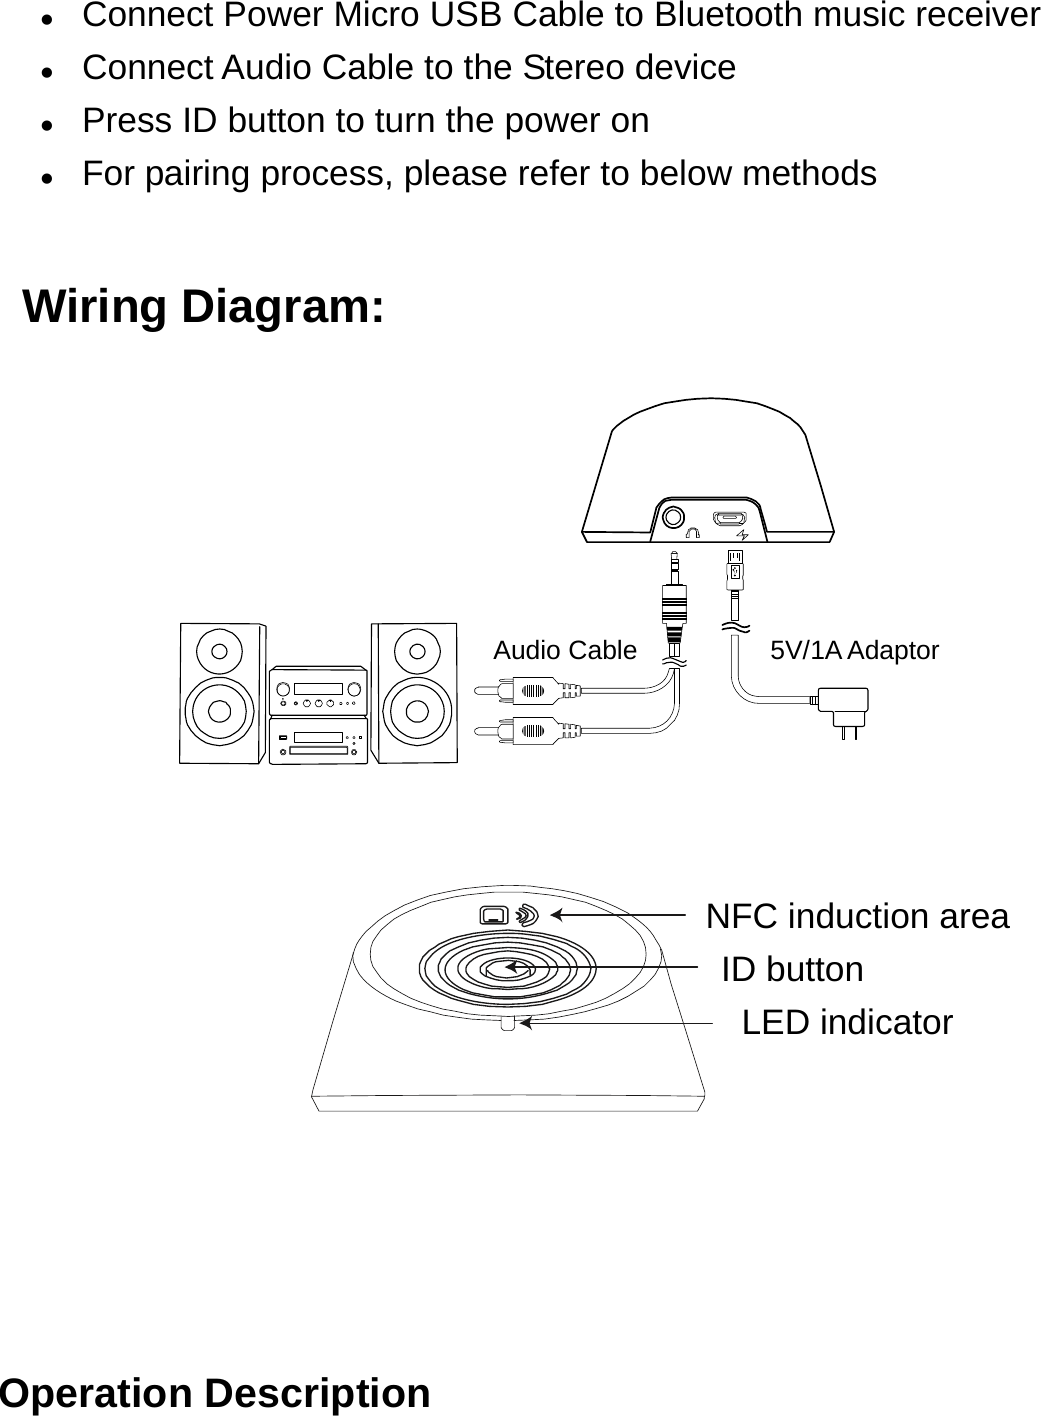  Connect Power Micro USB Cable to Bluetooth music receiver  Connect Audio Cable to the Stereo device  Press ID button to turn the power on  For pairing process, please refer to below methods    Wiring Diagram:                                  Audio Cable          5V/1A Adaptor                                        NFC induction area                                    ID button                                     LED indicator       Operation Description 